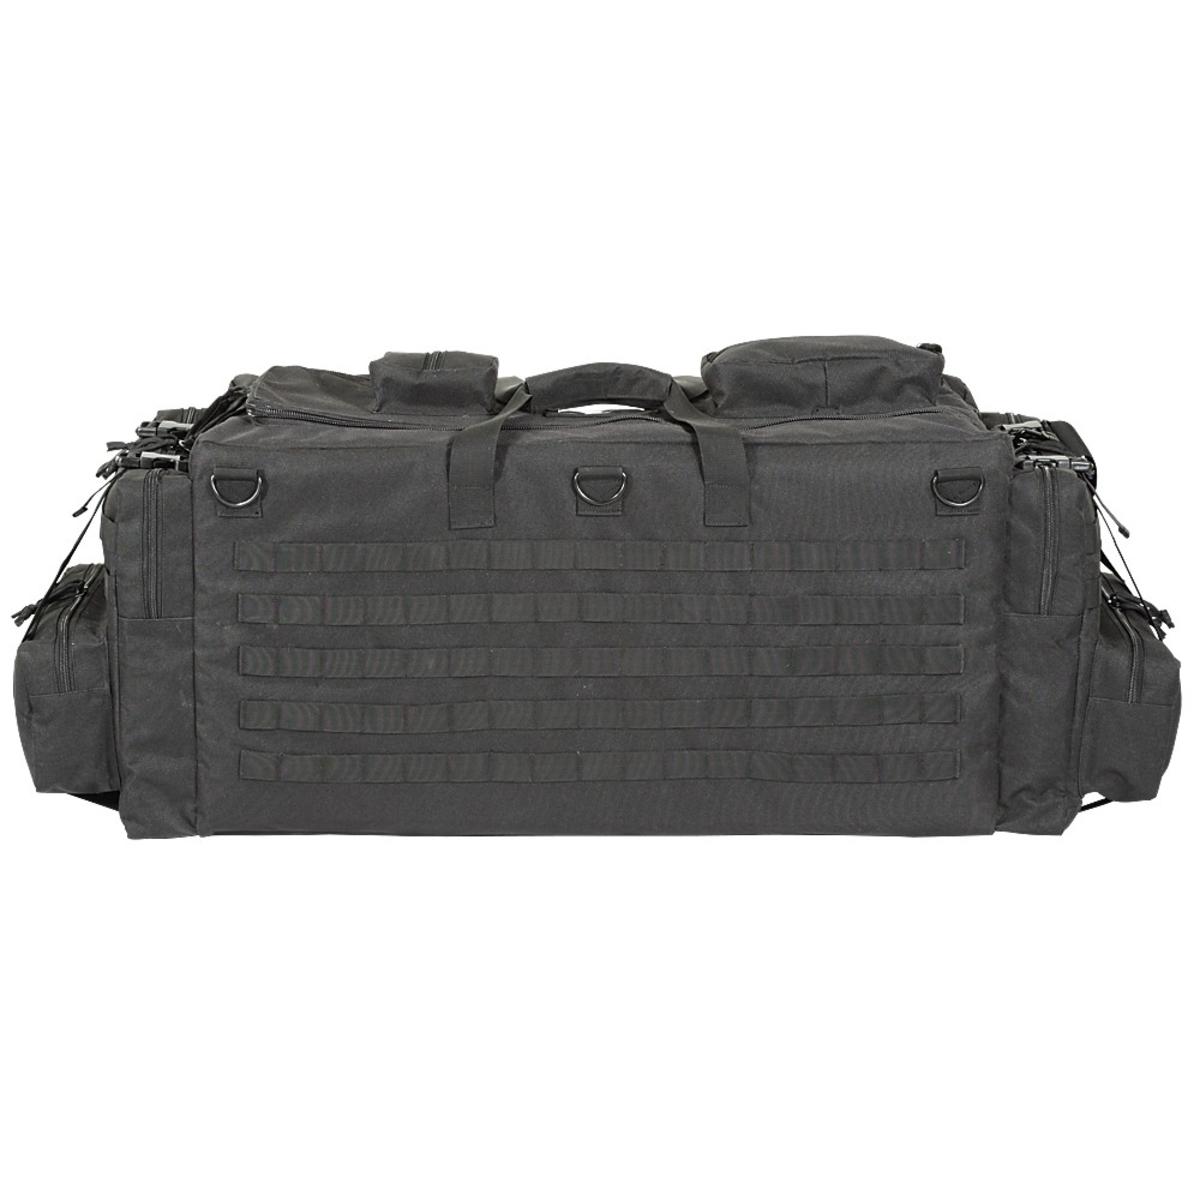 Voodoo Tactical Mojo Load-Out Bag with Backpack Straps | eBay